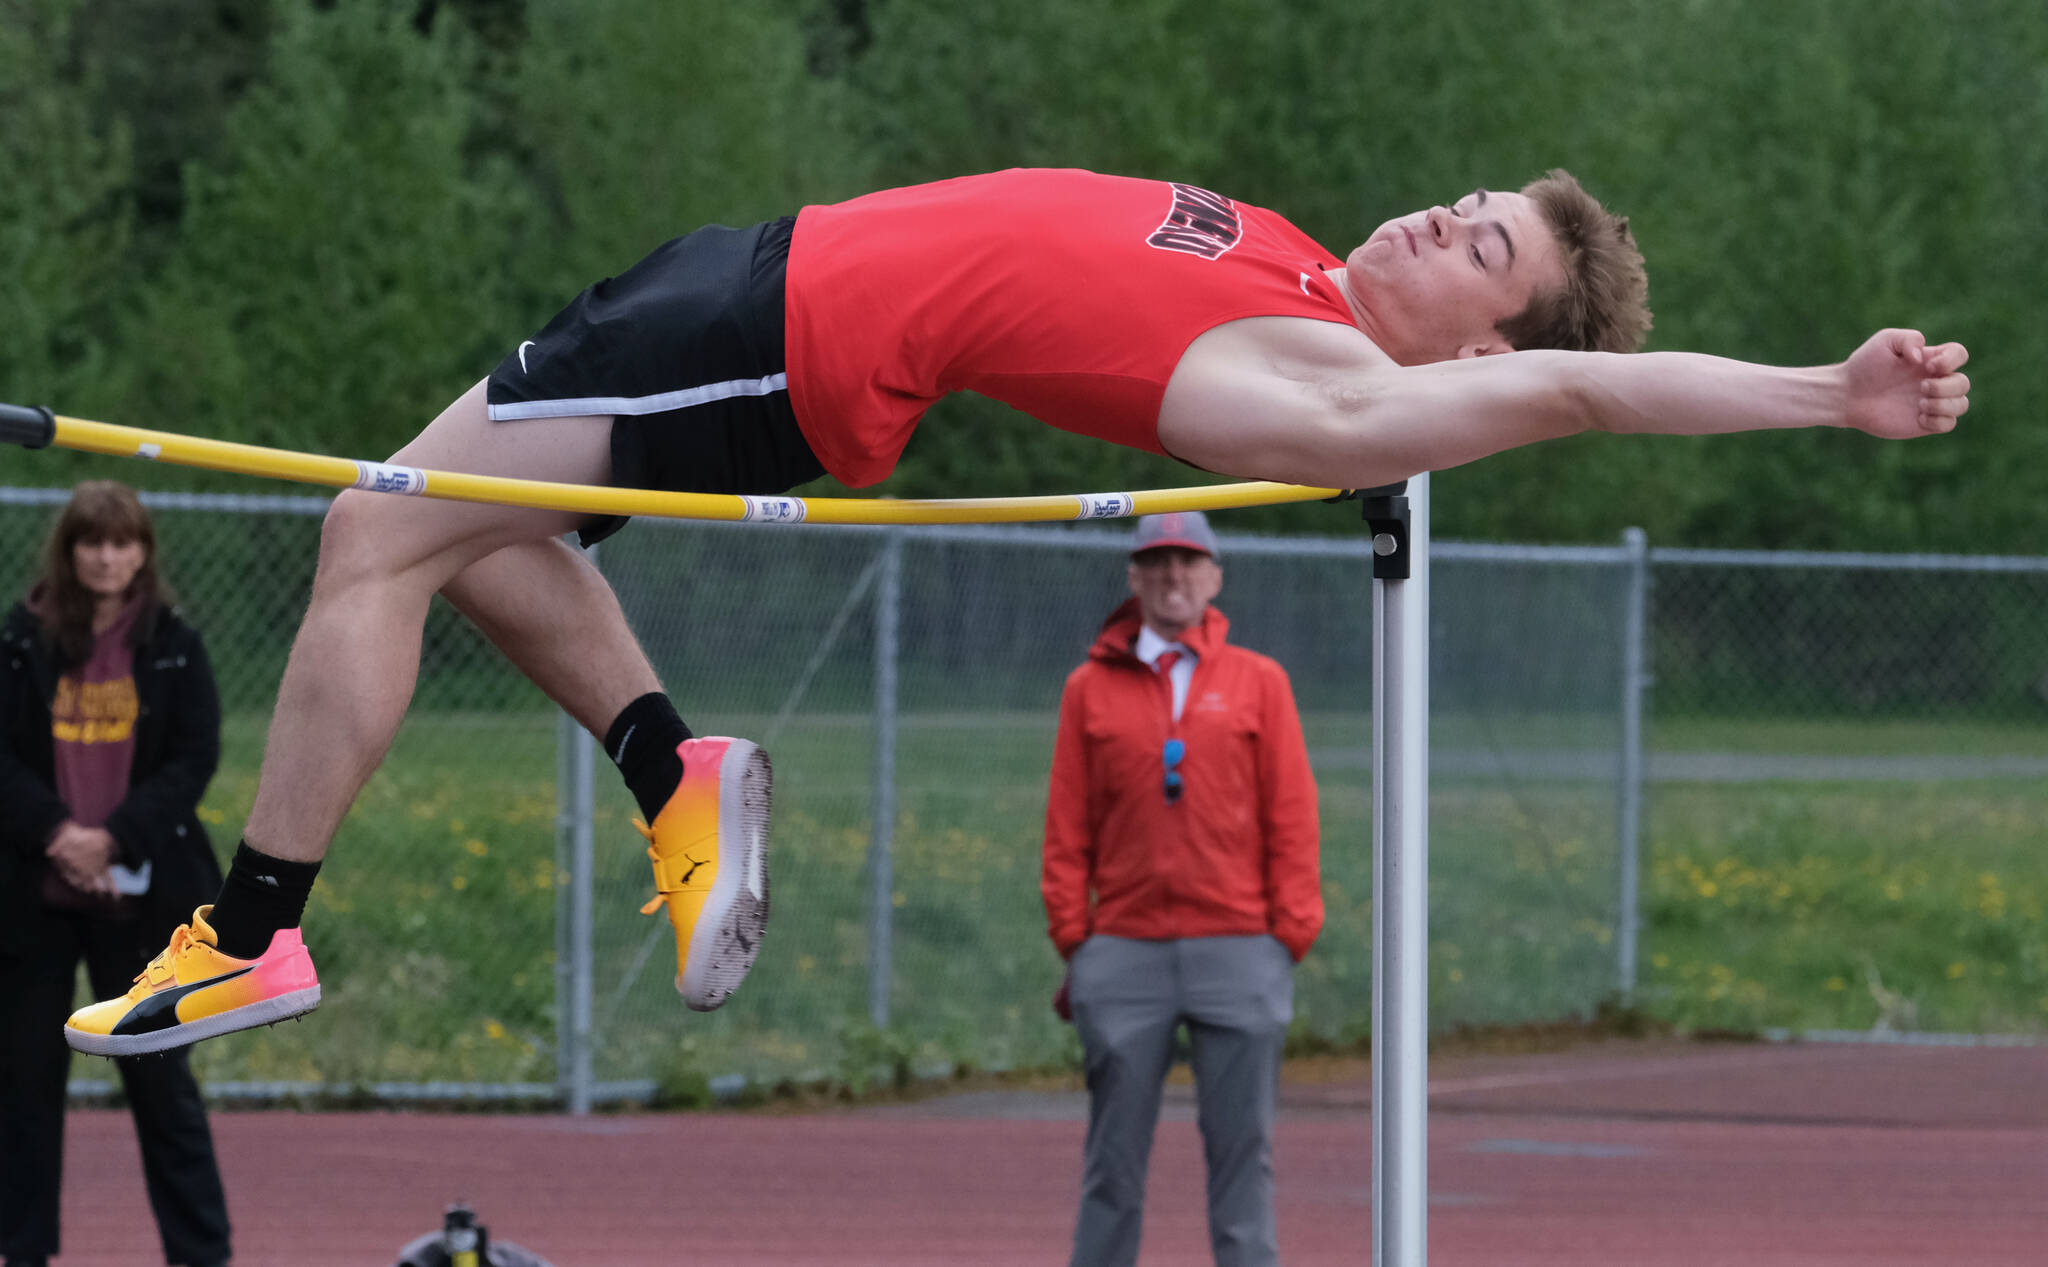 JDHS junior Brendan West wins the DI high jump as coach Jesse Stringer looks on during the Region V Track & Field Championships, Friday, at Thunder Mountain. The championships resume Saturday. (Klas Stolpe / Juneau Empire)